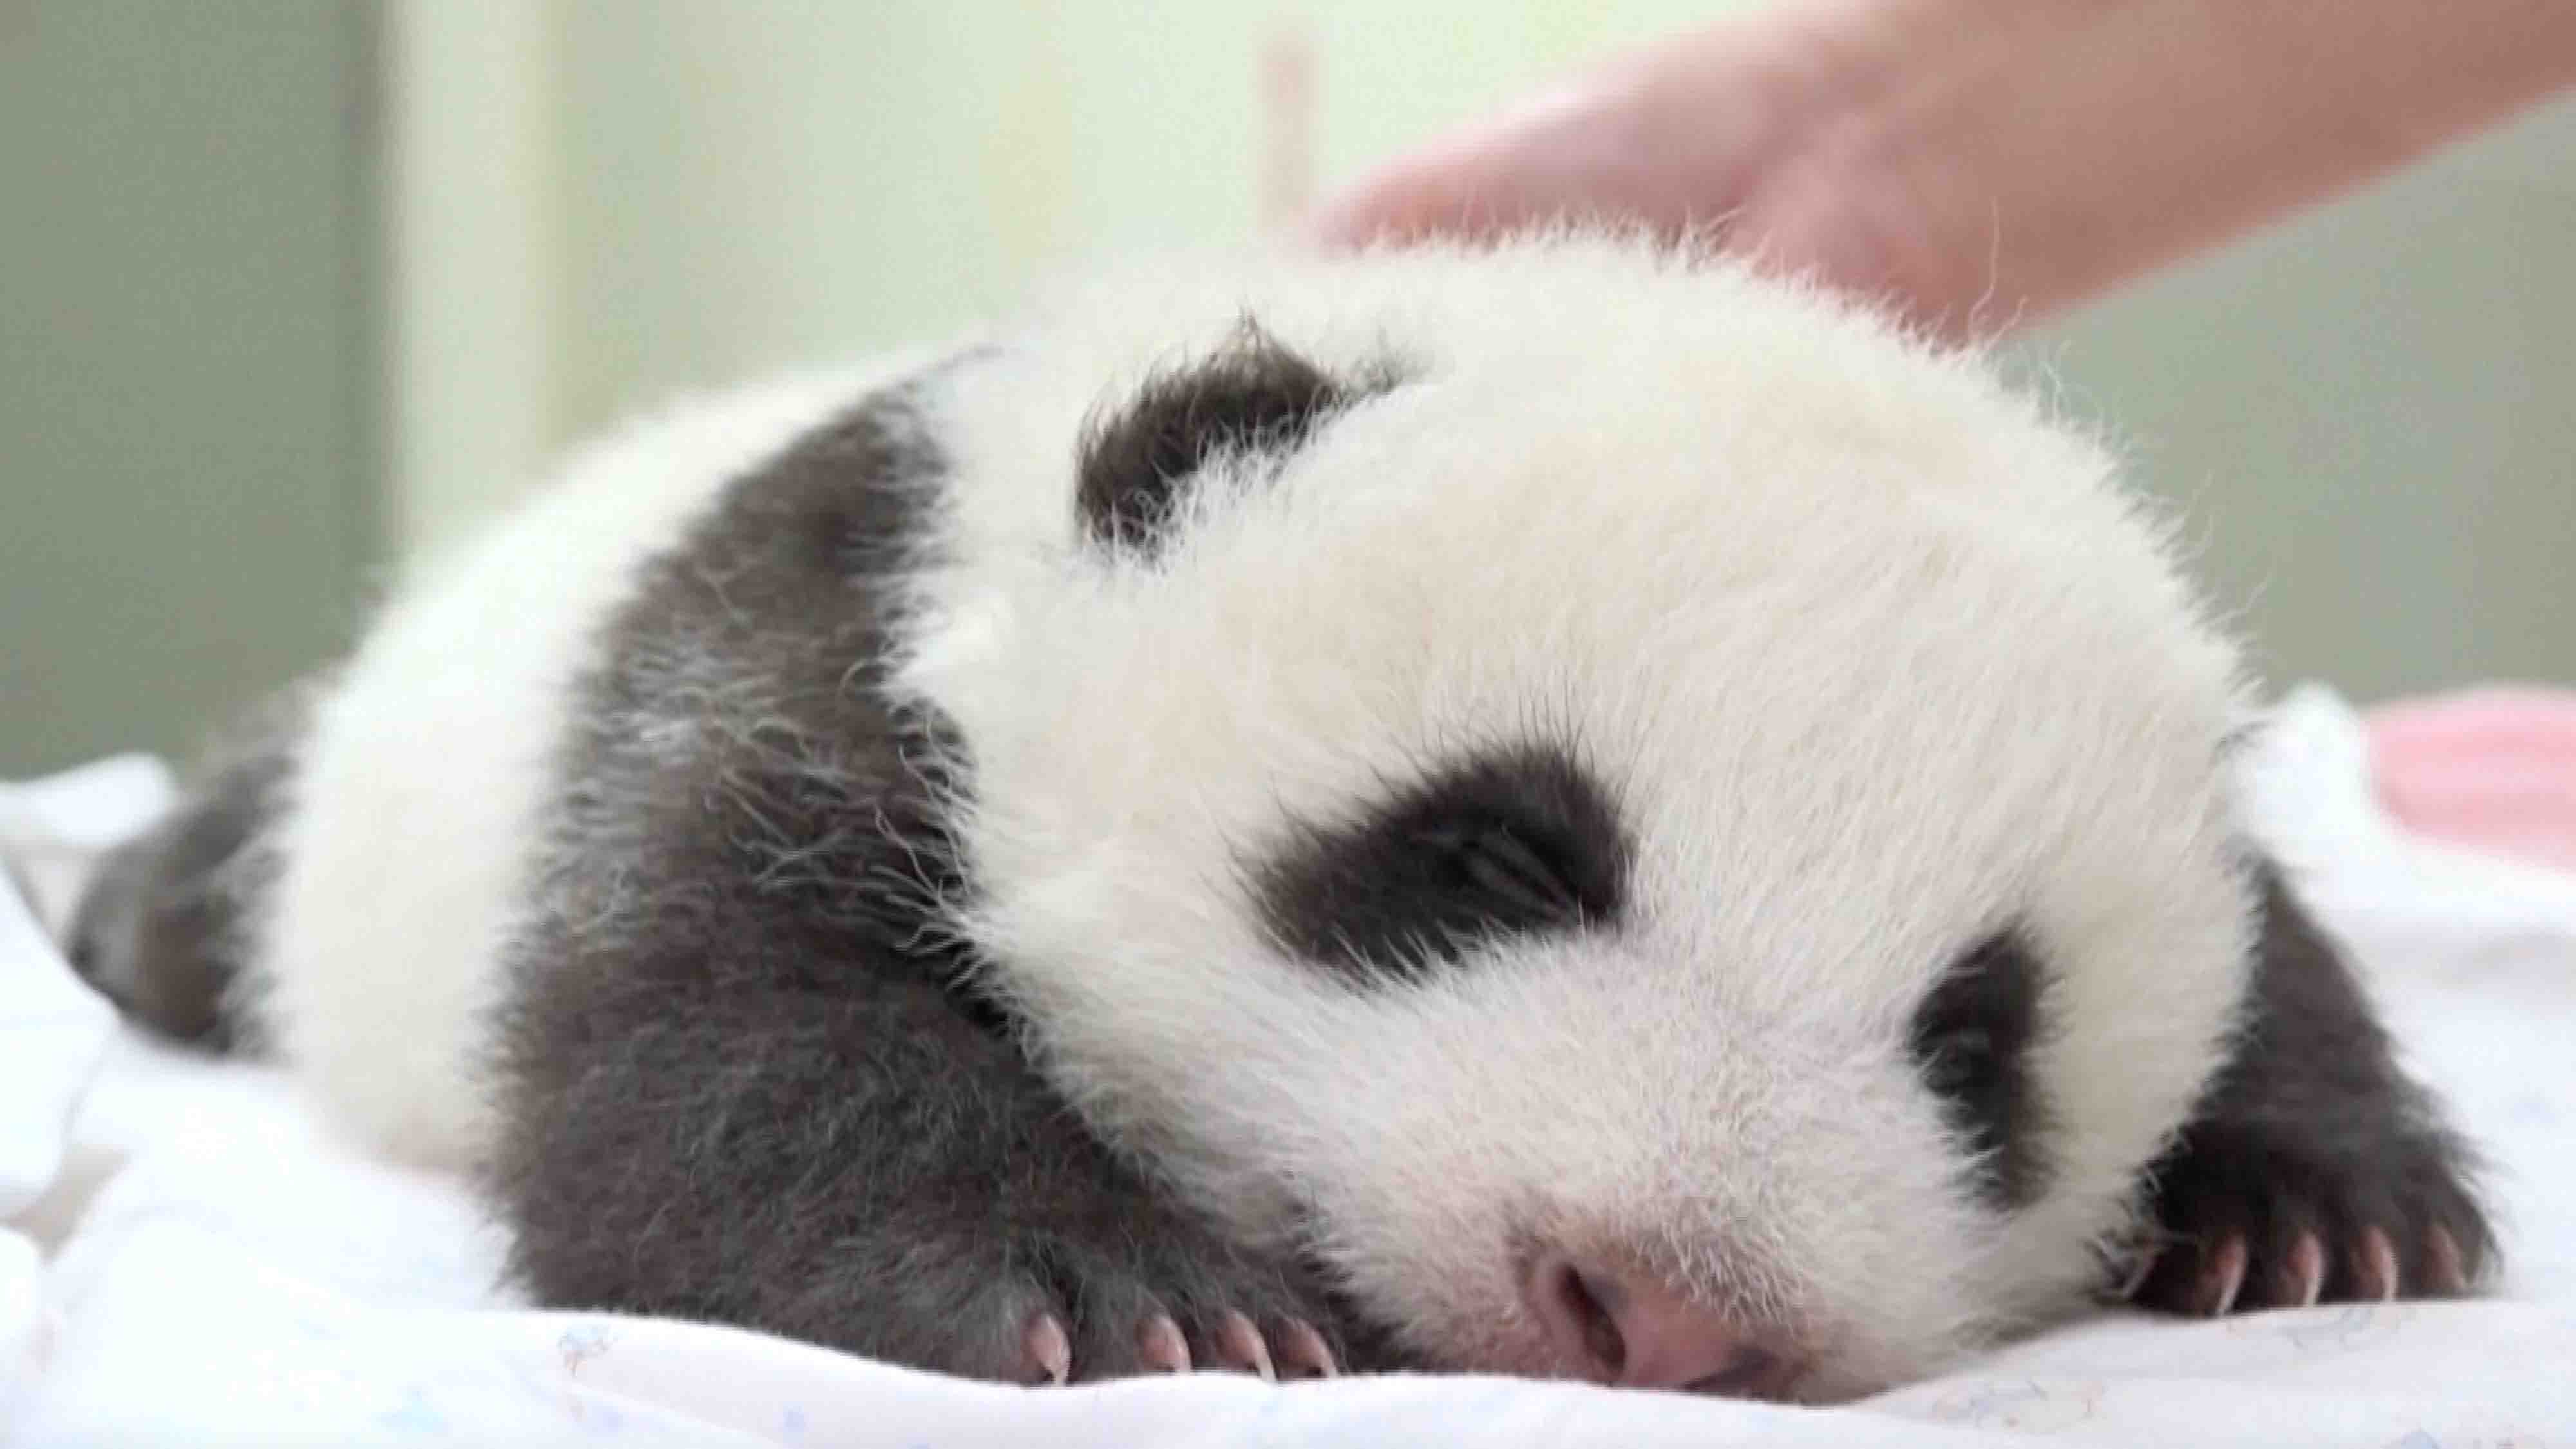 Taipei Zoo S Baby Panda Opens Eyes For First Time Cgtn